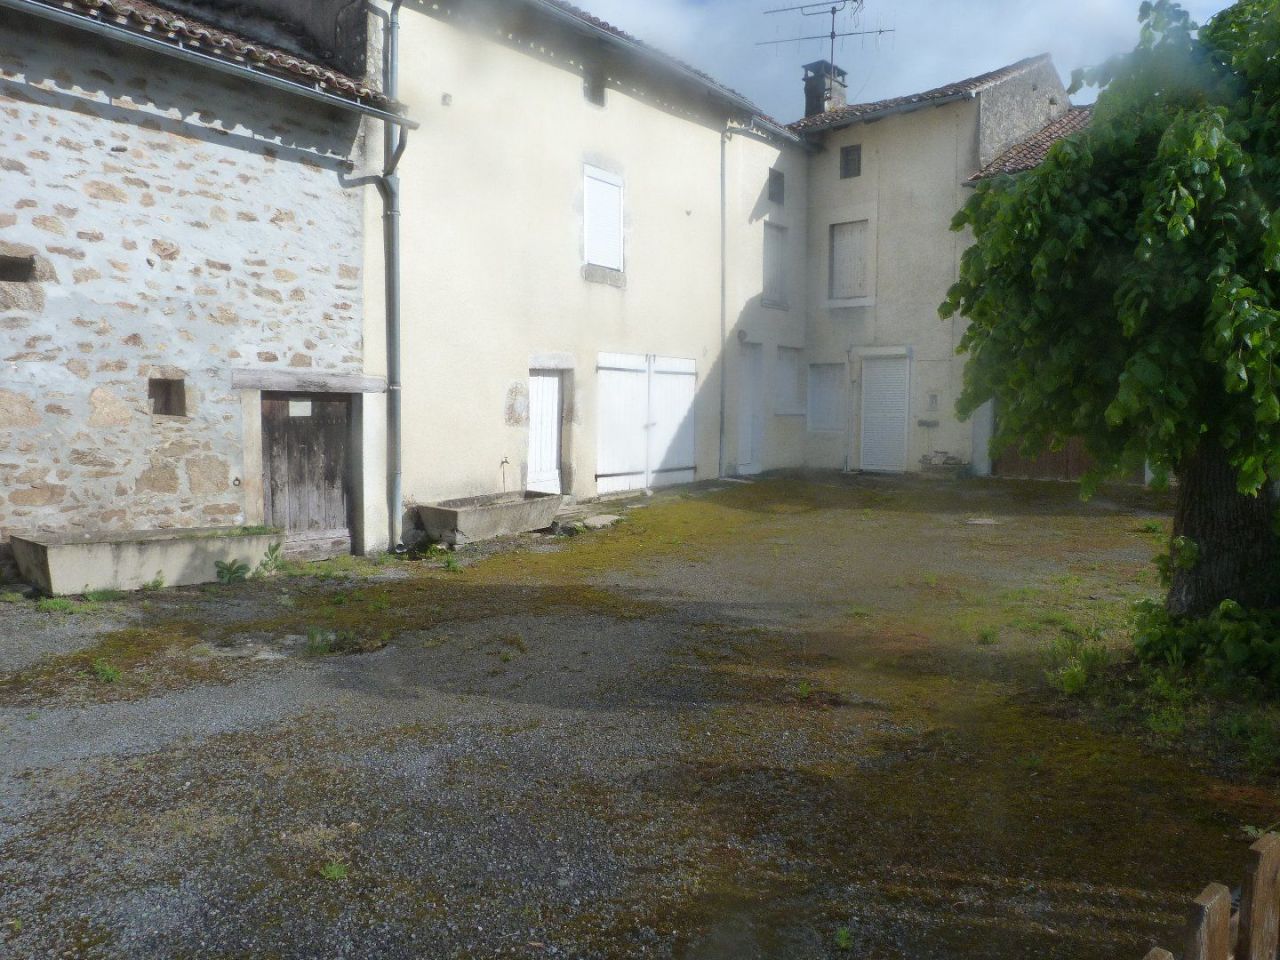 House in Limousin, France - picture 1